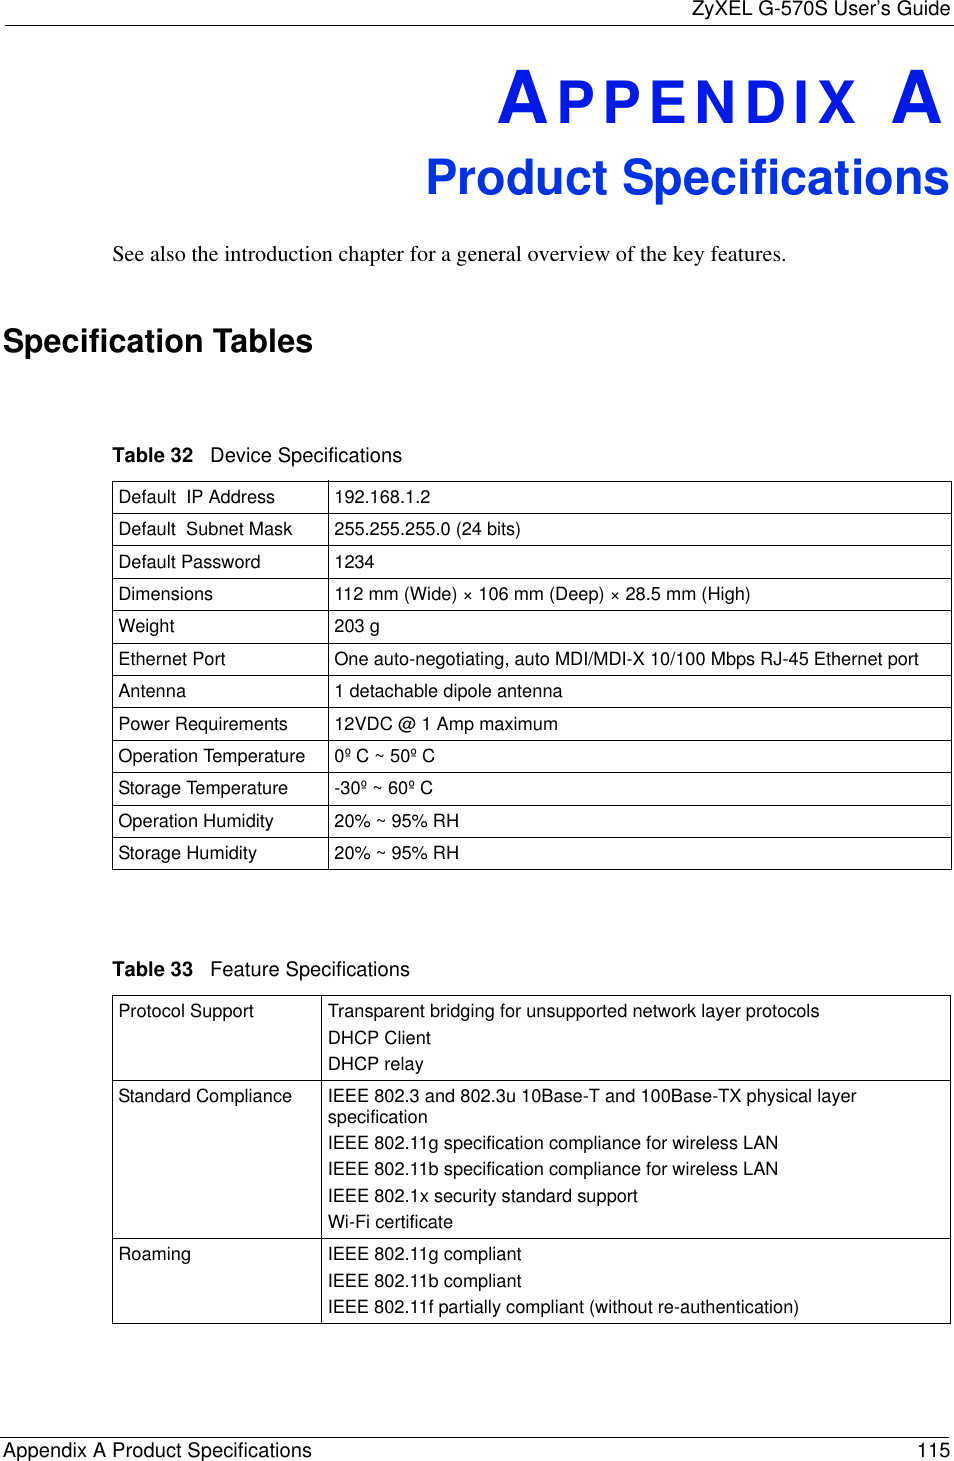 ZyXEL G-570S User’s GuideAppendix A Product Specifications 115APPENDIX AProduct SpecificationsSee also the introduction chapter for a general overview of the key features.Specification TablesTable 32   Device SpecificationsDefault  IP Address 192.168.1.2Default  Subnet Mask 255.255.255.0 (24 bits)Default Password 1234Dimensions 112 mm (Wide) × 106 mm (Deep) × 28.5 mm (High)Weight 203 gEthernet Port One auto-negotiating, auto MDI/MDI-X 10/100 Mbps RJ-45 Ethernet portAntenna 1 detachable dipole antennaPower Requirements 12VDC @ 1 Amp maximumOperation Temperature 0º C ~ 50º CStorage Temperature -30º ~ 60º COperation Humidity 20% ~ 95% RHStorage Humidity 20% ~ 95% RHTable 33   Feature SpecificationsProtocol Support Transparent bridging for unsupported network layer protocolsDHCP ClientDHCP relayStandard Compliance IEEE 802.3 and 802.3u 10Base-T and 100Base-TX physical layer specificationIEEE 802.11g specification compliance for wireless LANIEEE 802.11b specification compliance for wireless LANIEEE 802.1x security standard supportWi-Fi certificateRoaming IEEE 802.11g compliantIEEE 802.11b compliantIEEE 802.11f partially compliant (without re-authentication)